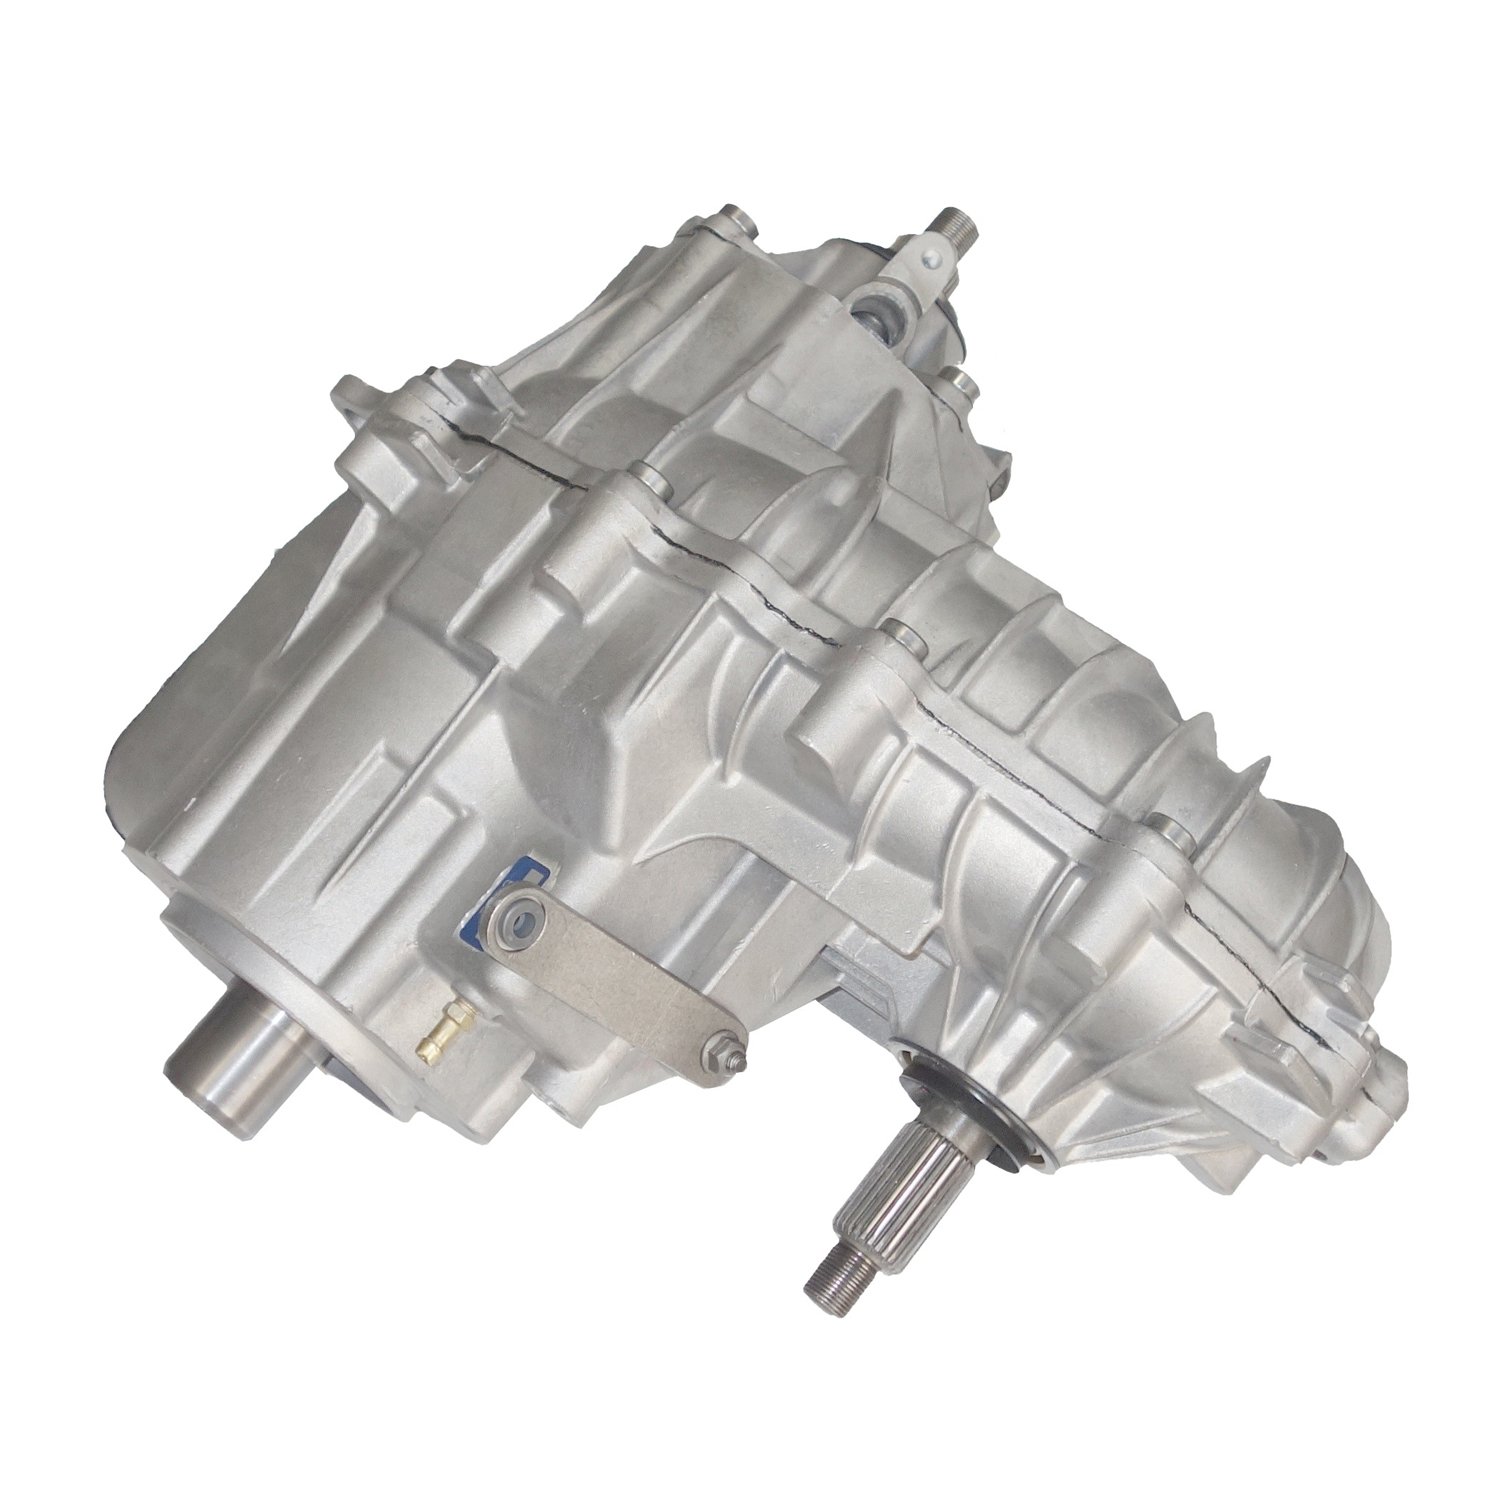 Remanufactured BW1370 & BW4401 Transfer Case for GM